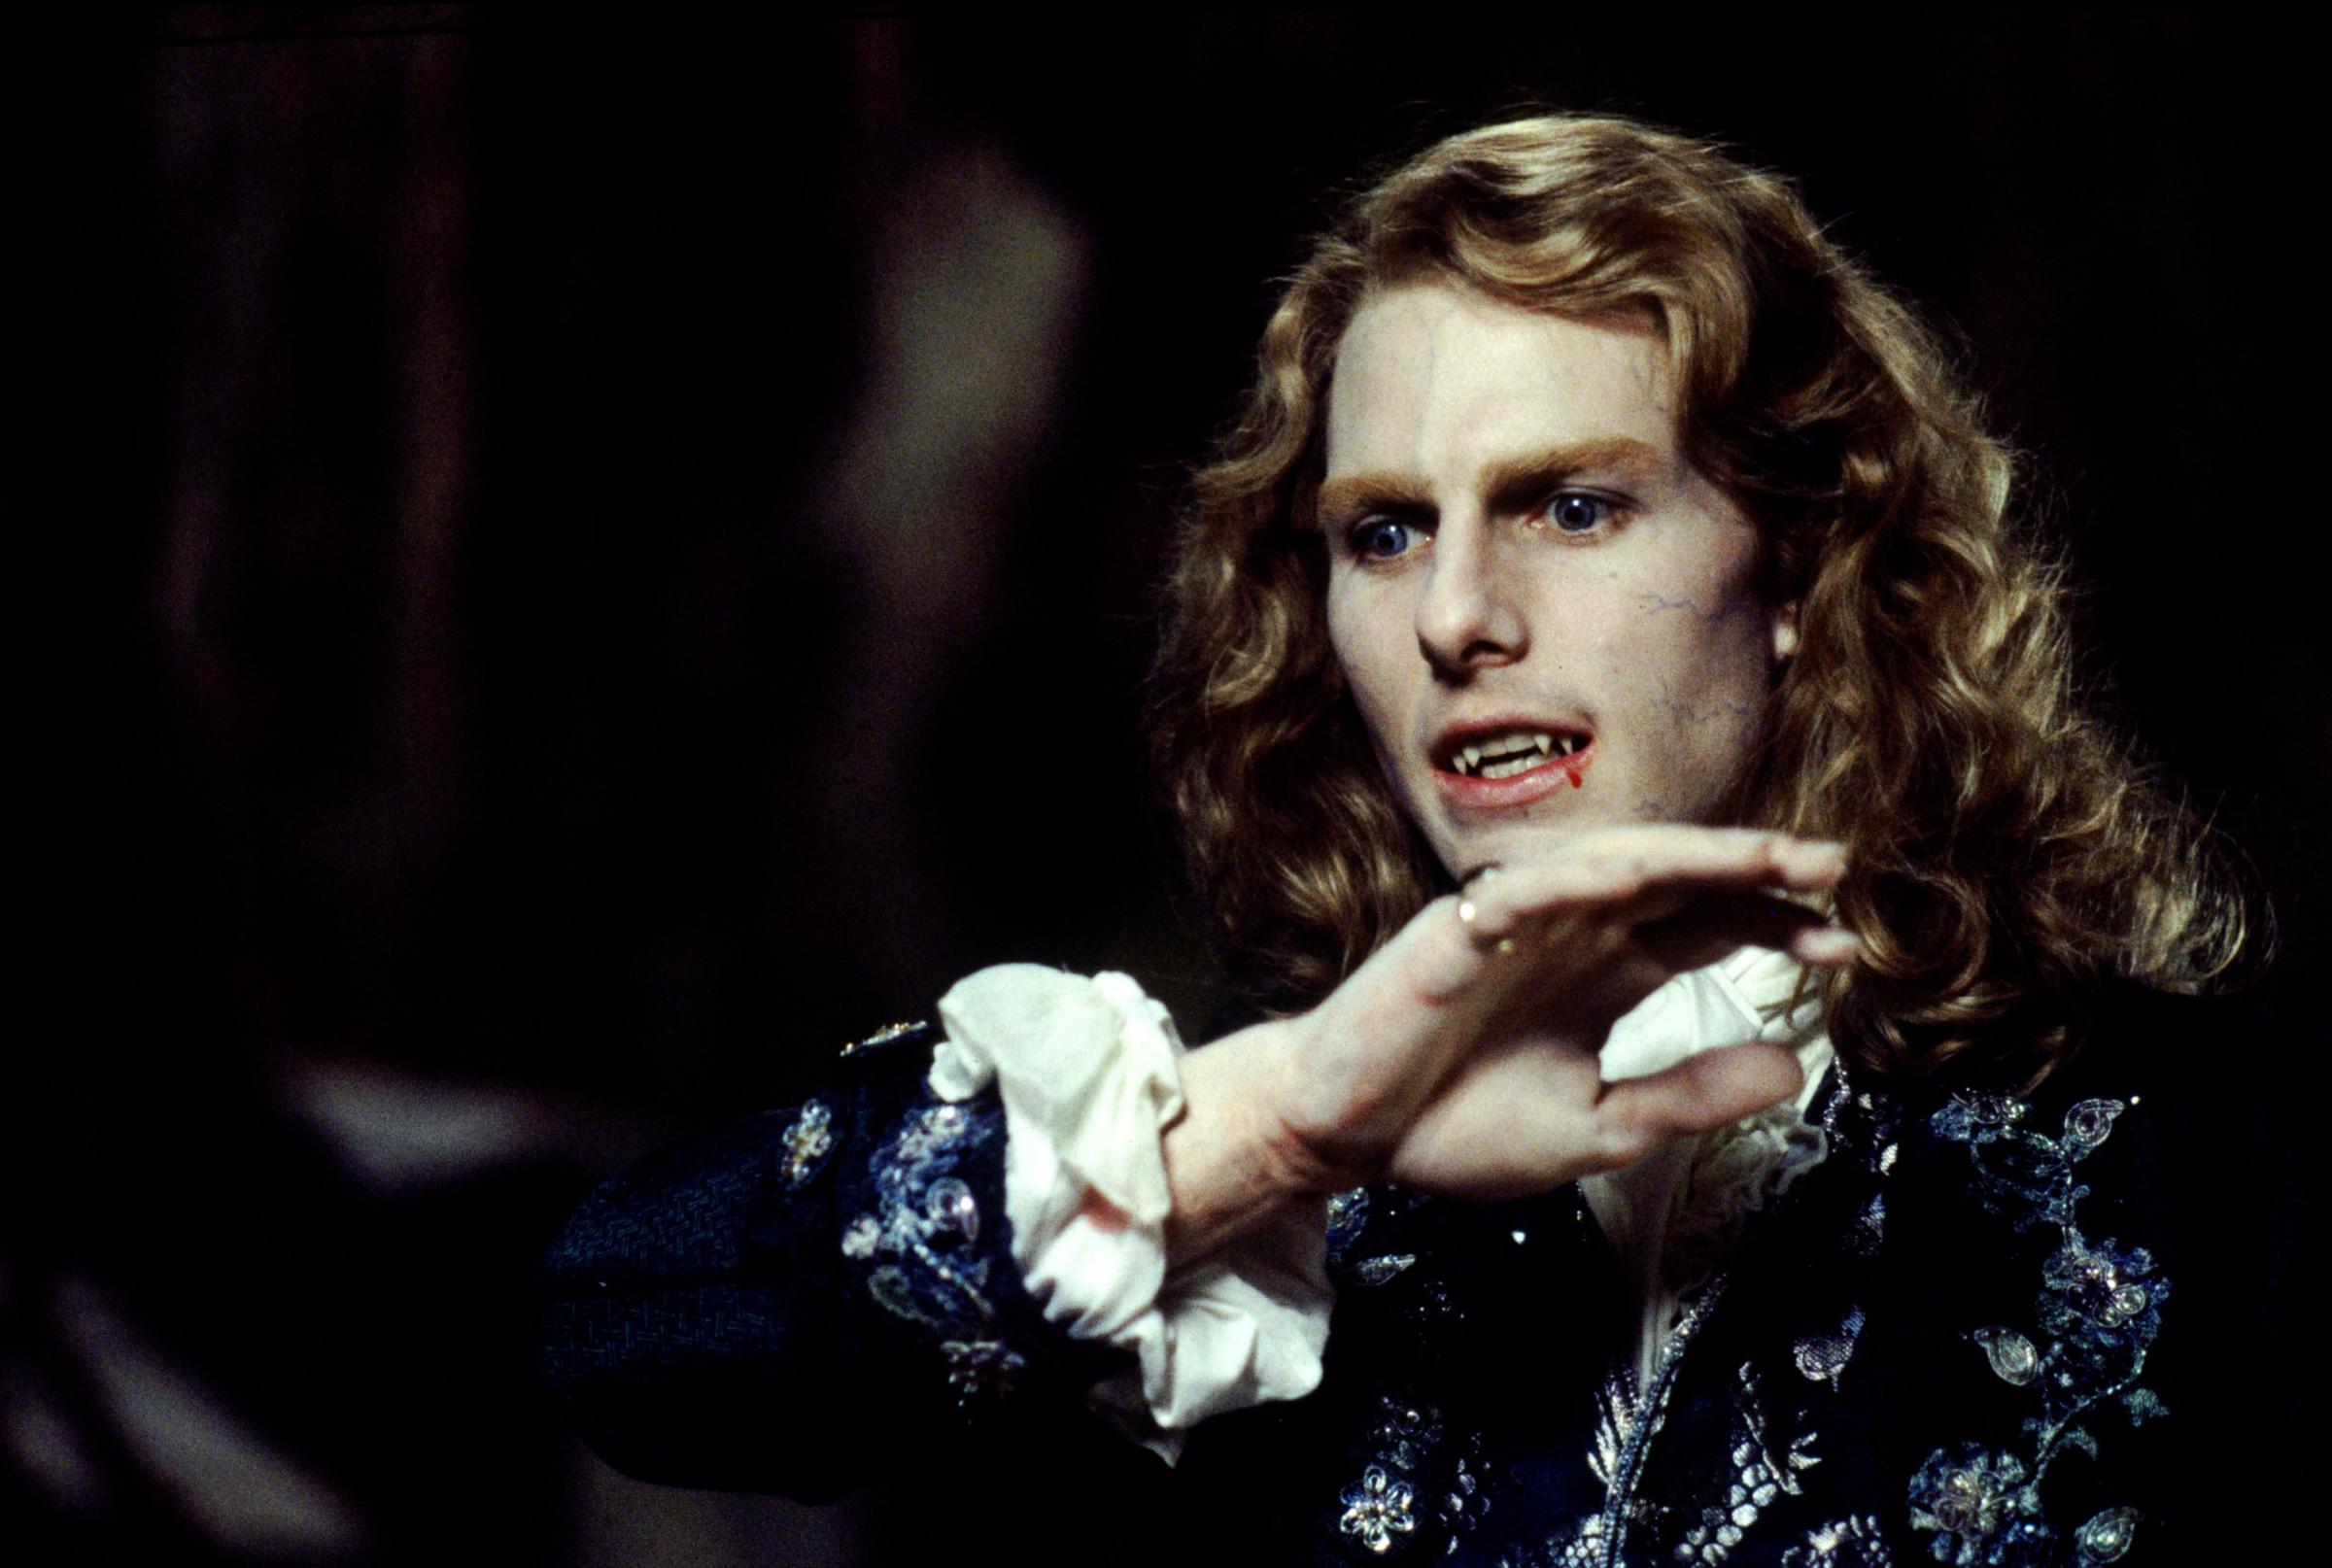 Tom Cruise as Lestat de Lioncourt in Interview with the Vampire, 1994.